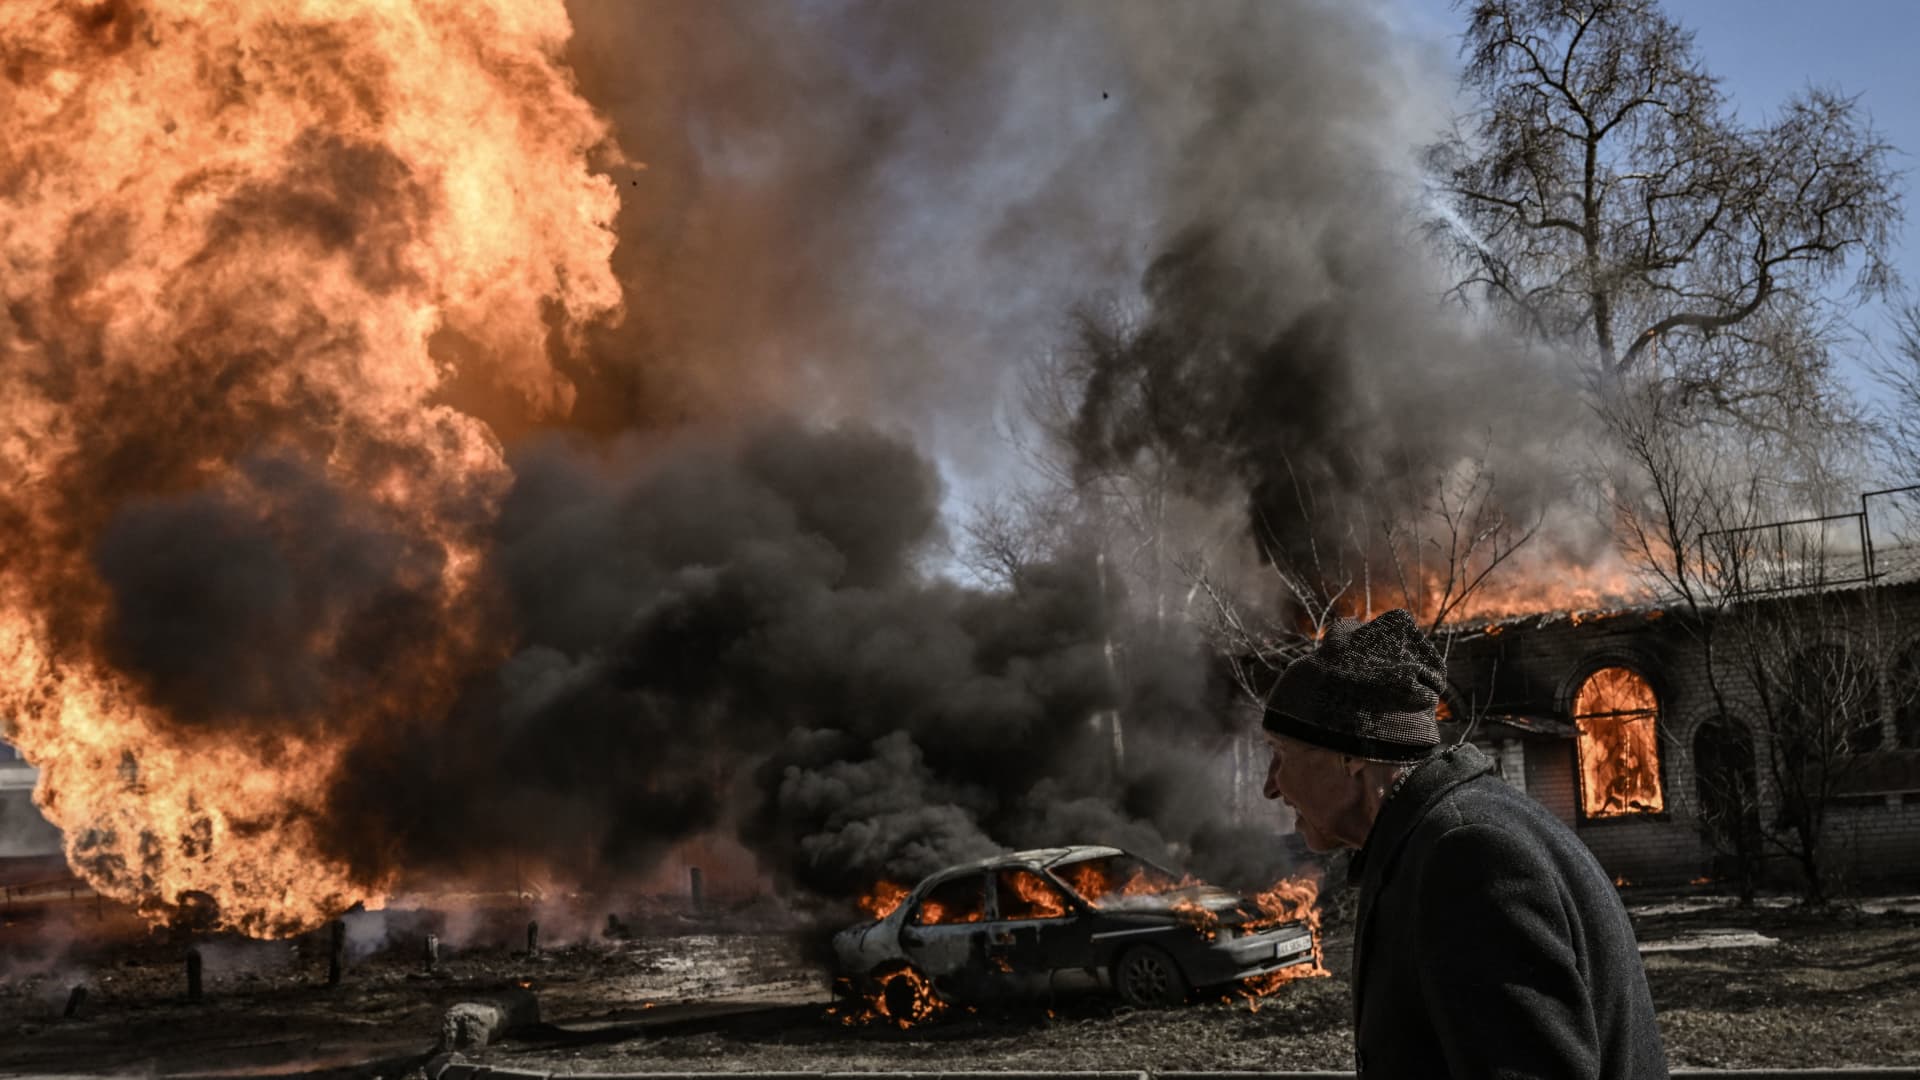 A Ukrainian woman walks past flames and smoke rising from a fire following an artillery fire on the 30th day of the invasion of Ukraine by Russian forces in the northeastern city of Kharkiv on March 25, 2022.